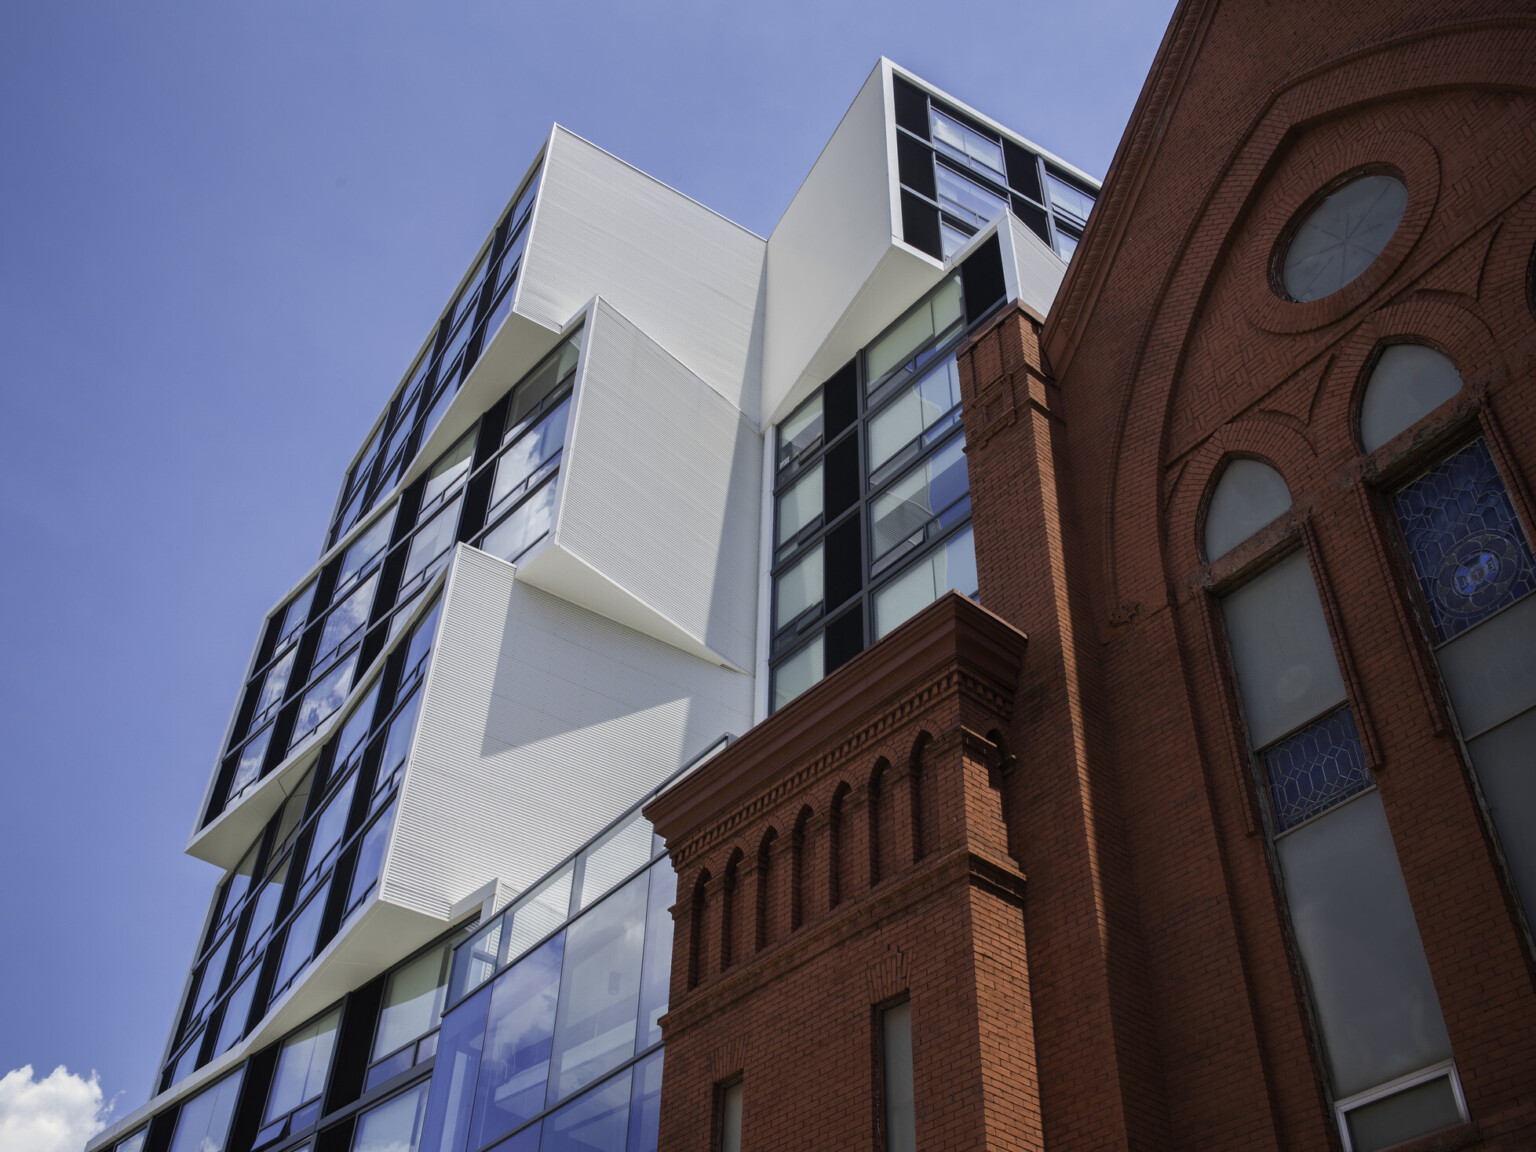 A white modern building with stacked squares filled with windows overlooking a red brick building